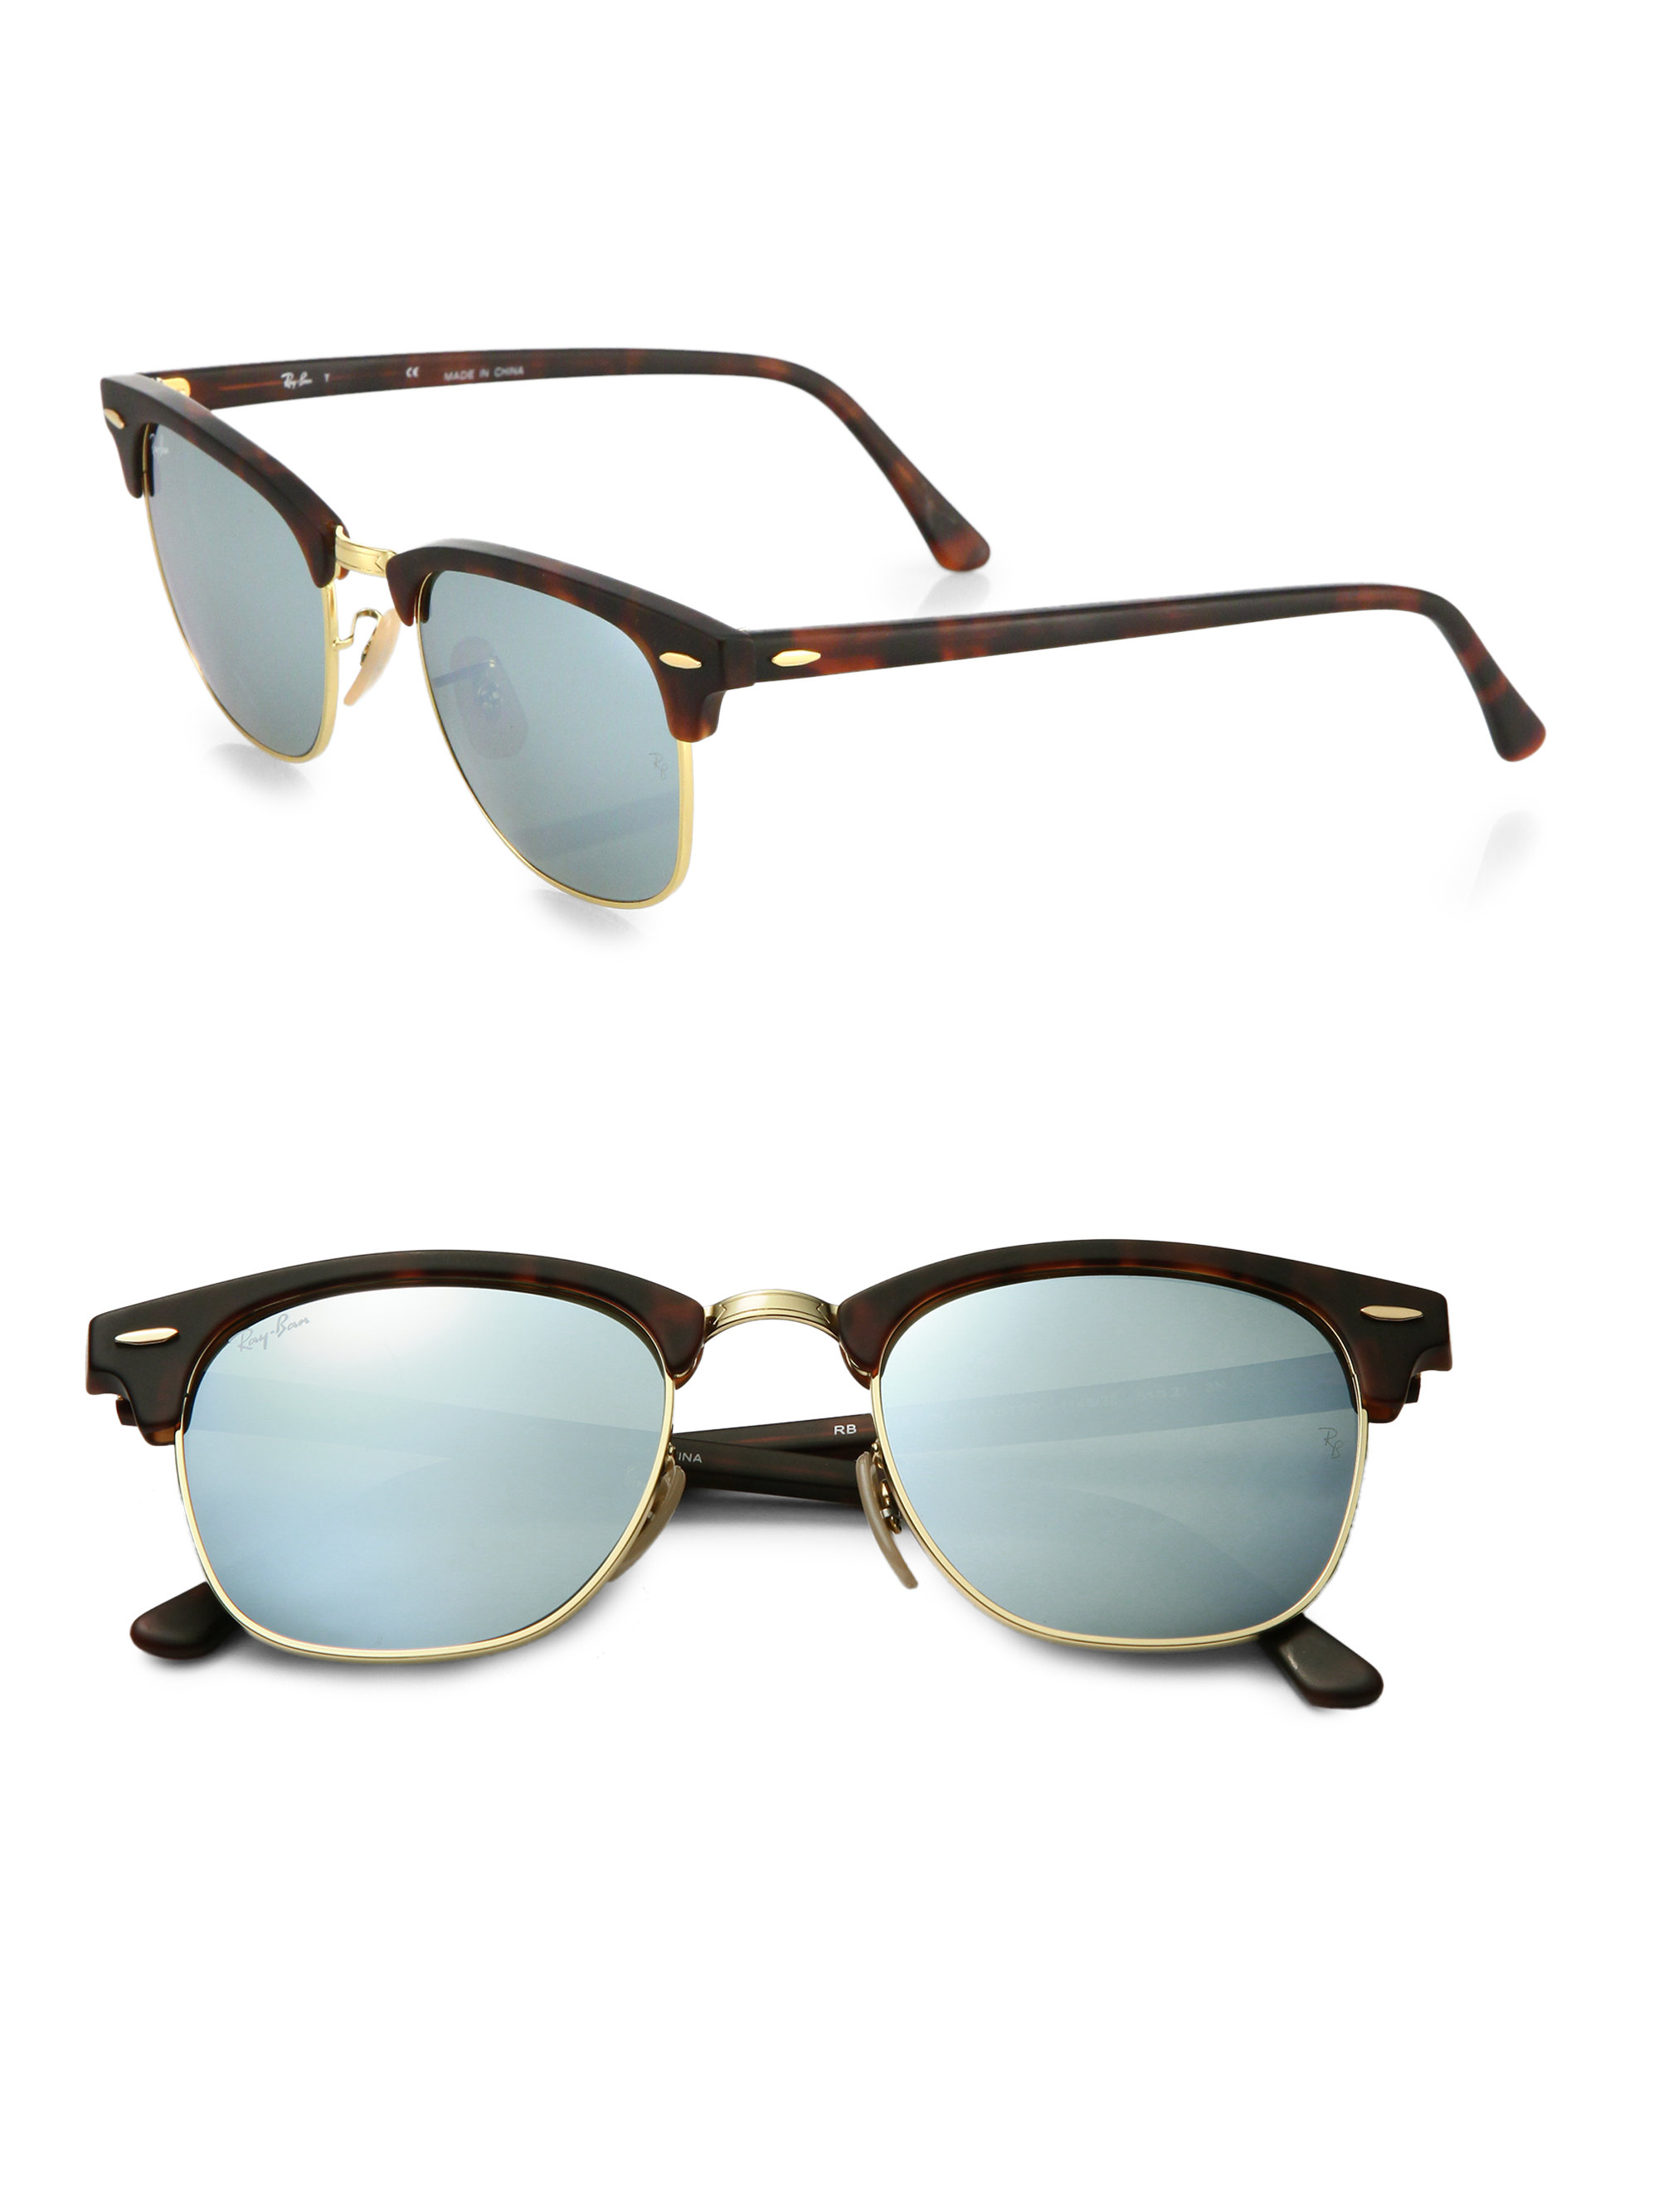 New cheap ray ban sunglasses in usa online 2019